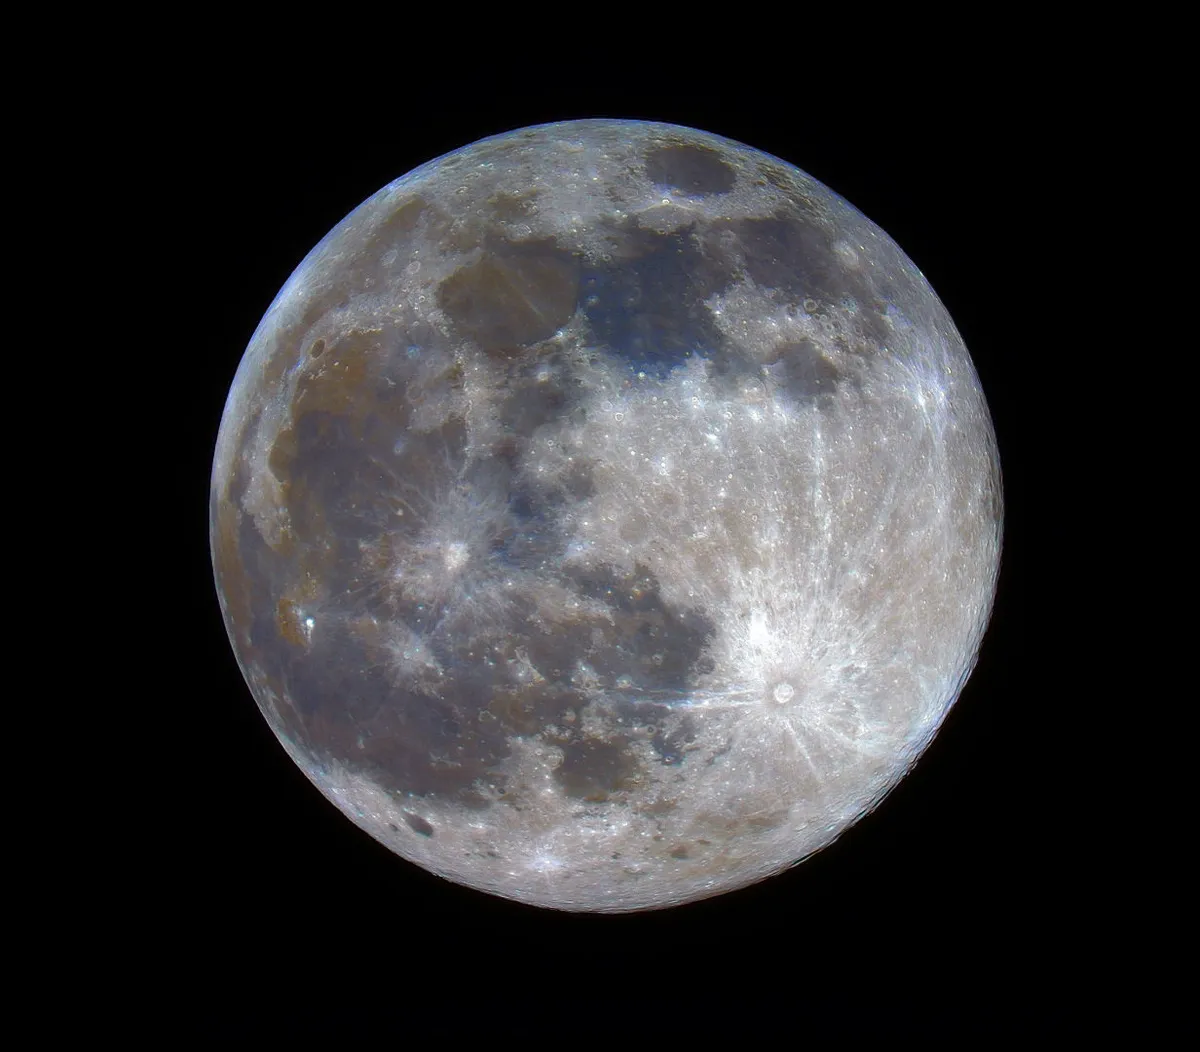 The Wolf Moon, full Moon of 17 January 2022, captured by Dan Fleetwood, Rugby, UK.